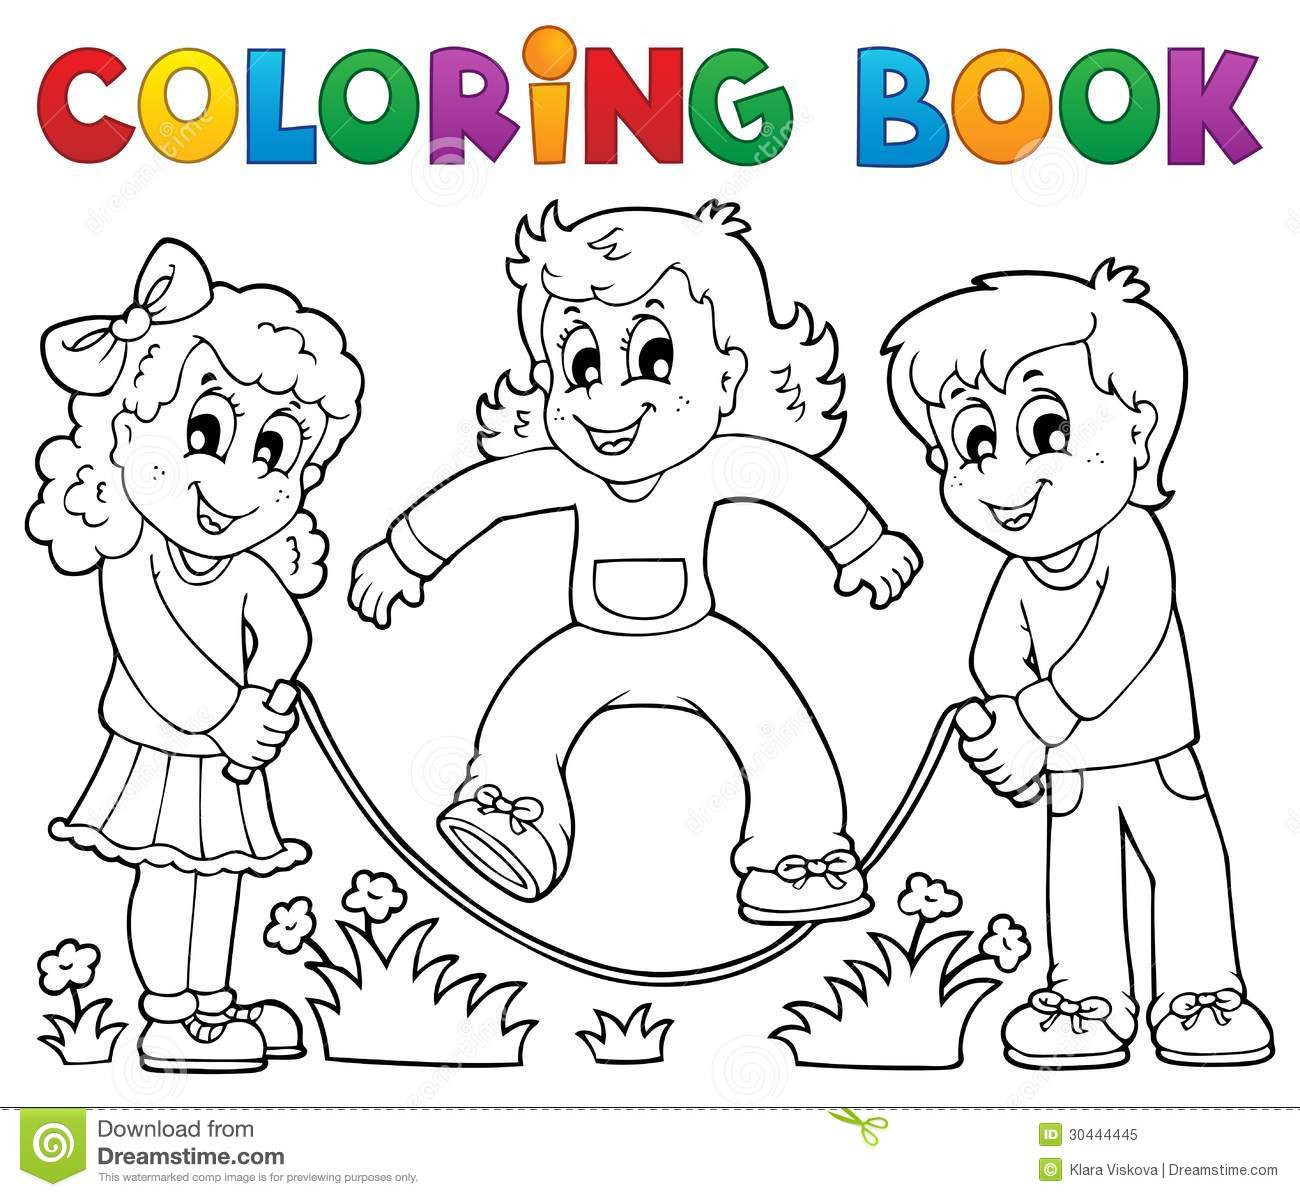 Coloring Book For Toddler
 Coloring Book Kids Play Theme 1 Royalty Free Stock